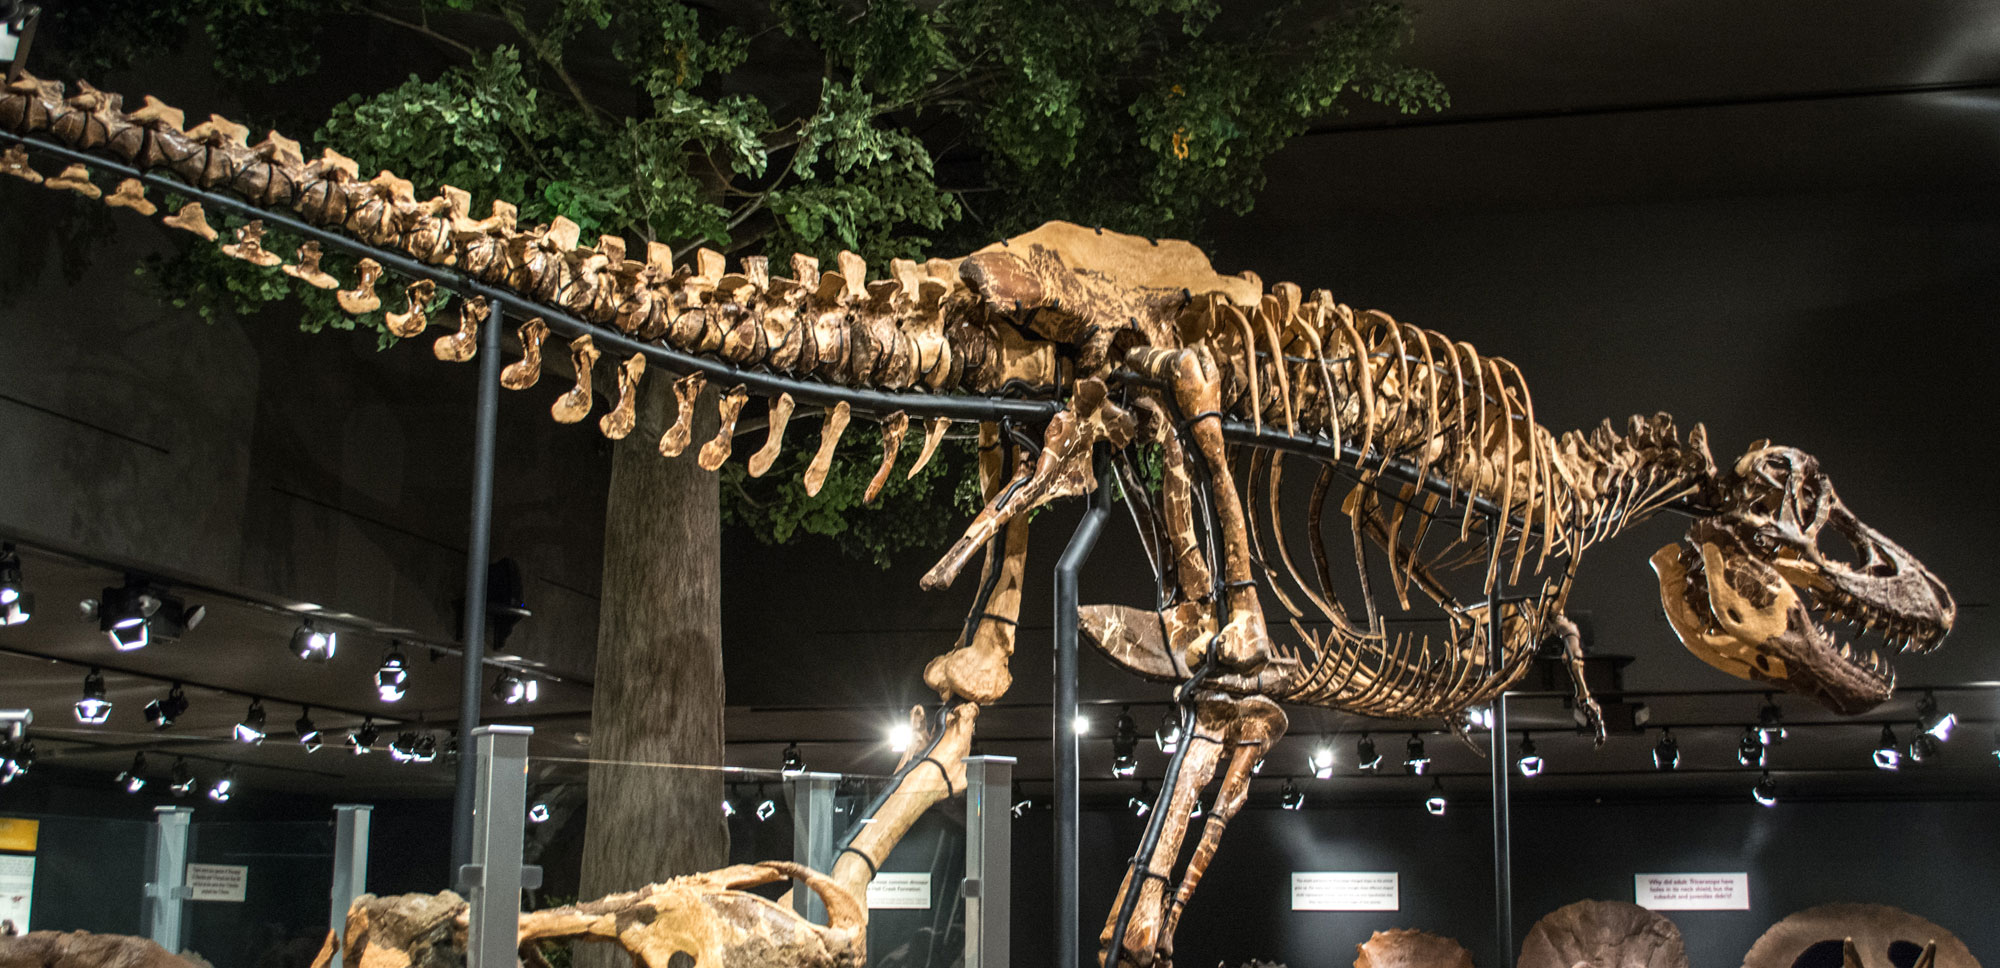 Photograph of a mounted Tyrannosaurus rex specimen called "Montana's T. rex" on display at the Museum of the Rockies in Bozeman, Montana. Tyrannosaurus is a carnivorous dinosaur with a large skull and large, slightly curved, pointed teeth; it is bipedal, with powerful hind legs and relatively puny arms. The tail is long and held up off the ground. The photo is taken from the rear-side of the skeleton, showing much of its length, with the tail especially prominent. The end of the tail and the feet are cropped out of the image. The skeleton is mounted in a striding position.